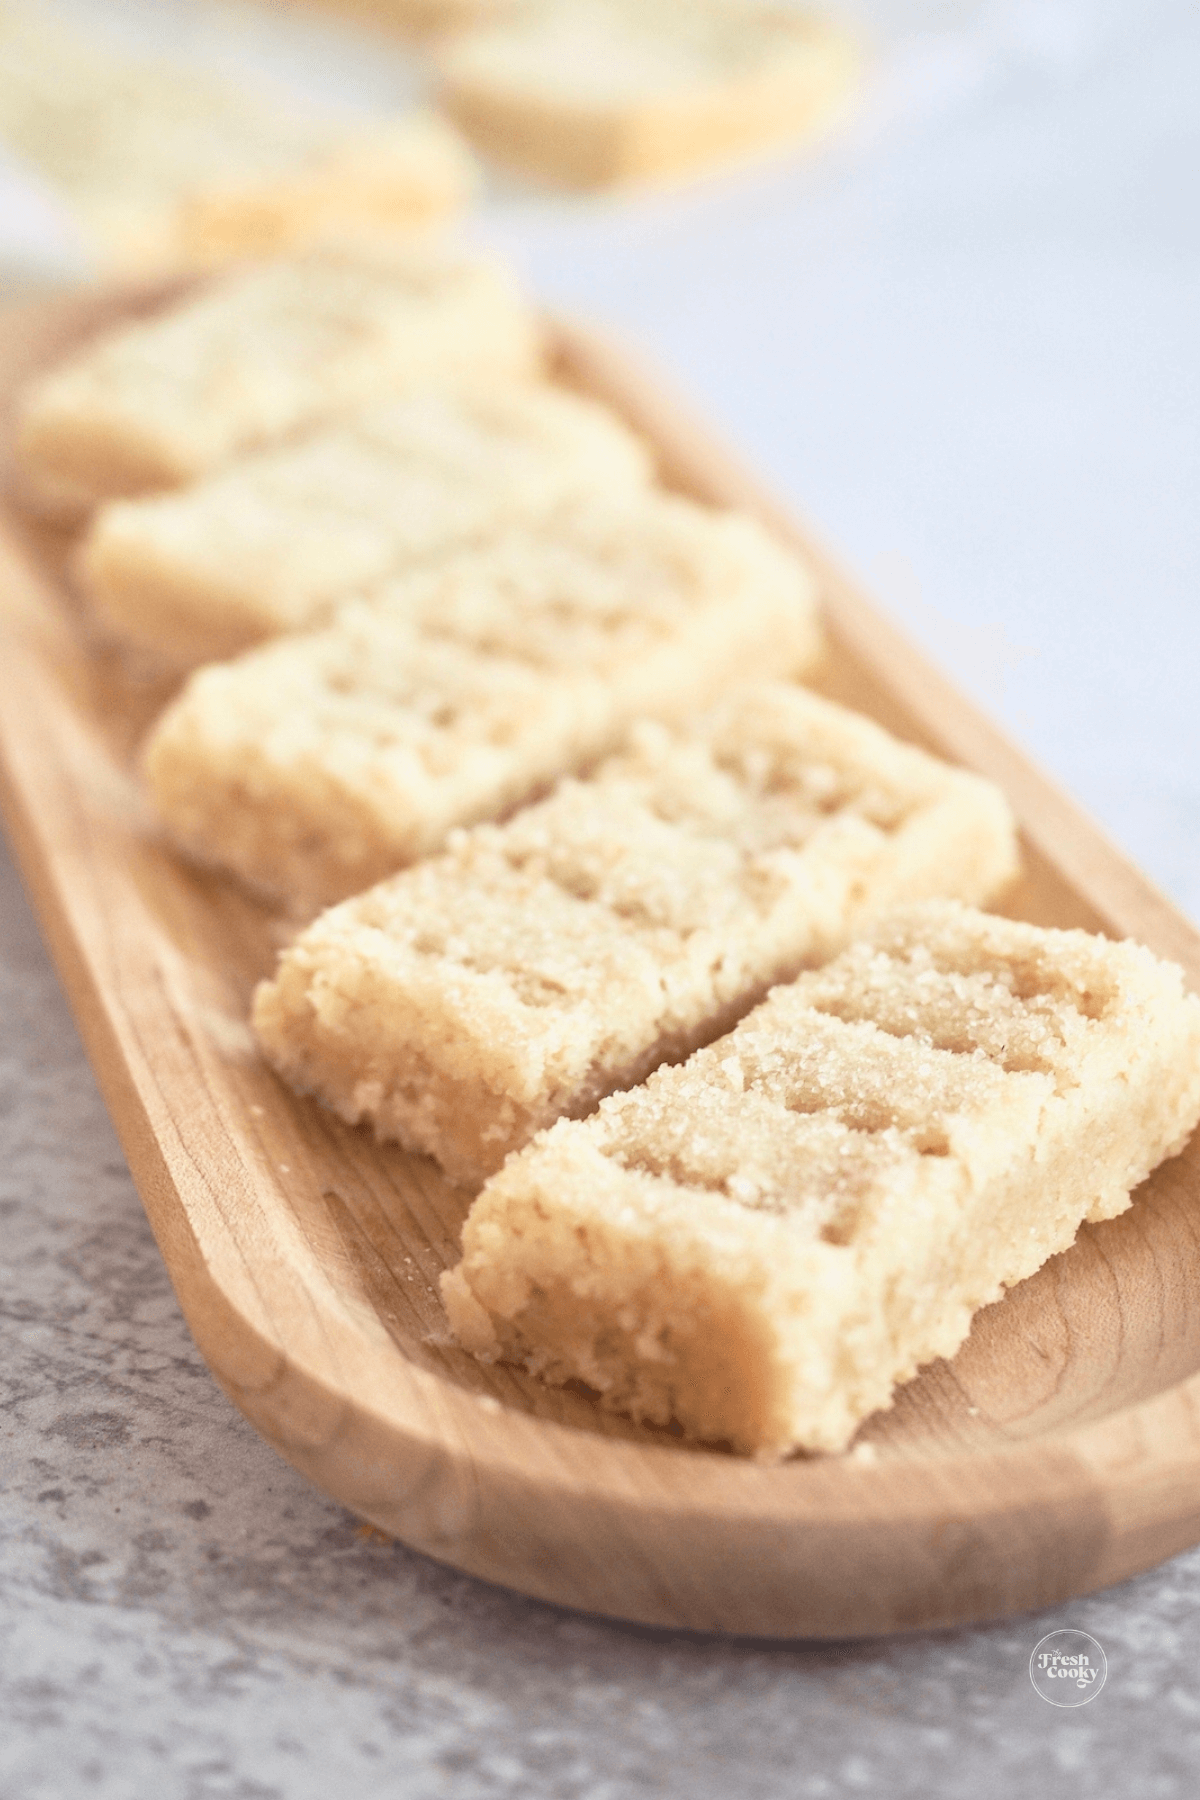 https://www.thefreshcooky.com/wp-content/uploads/2020/11/Classic-Scottish-Shortbread-fingers-2.png